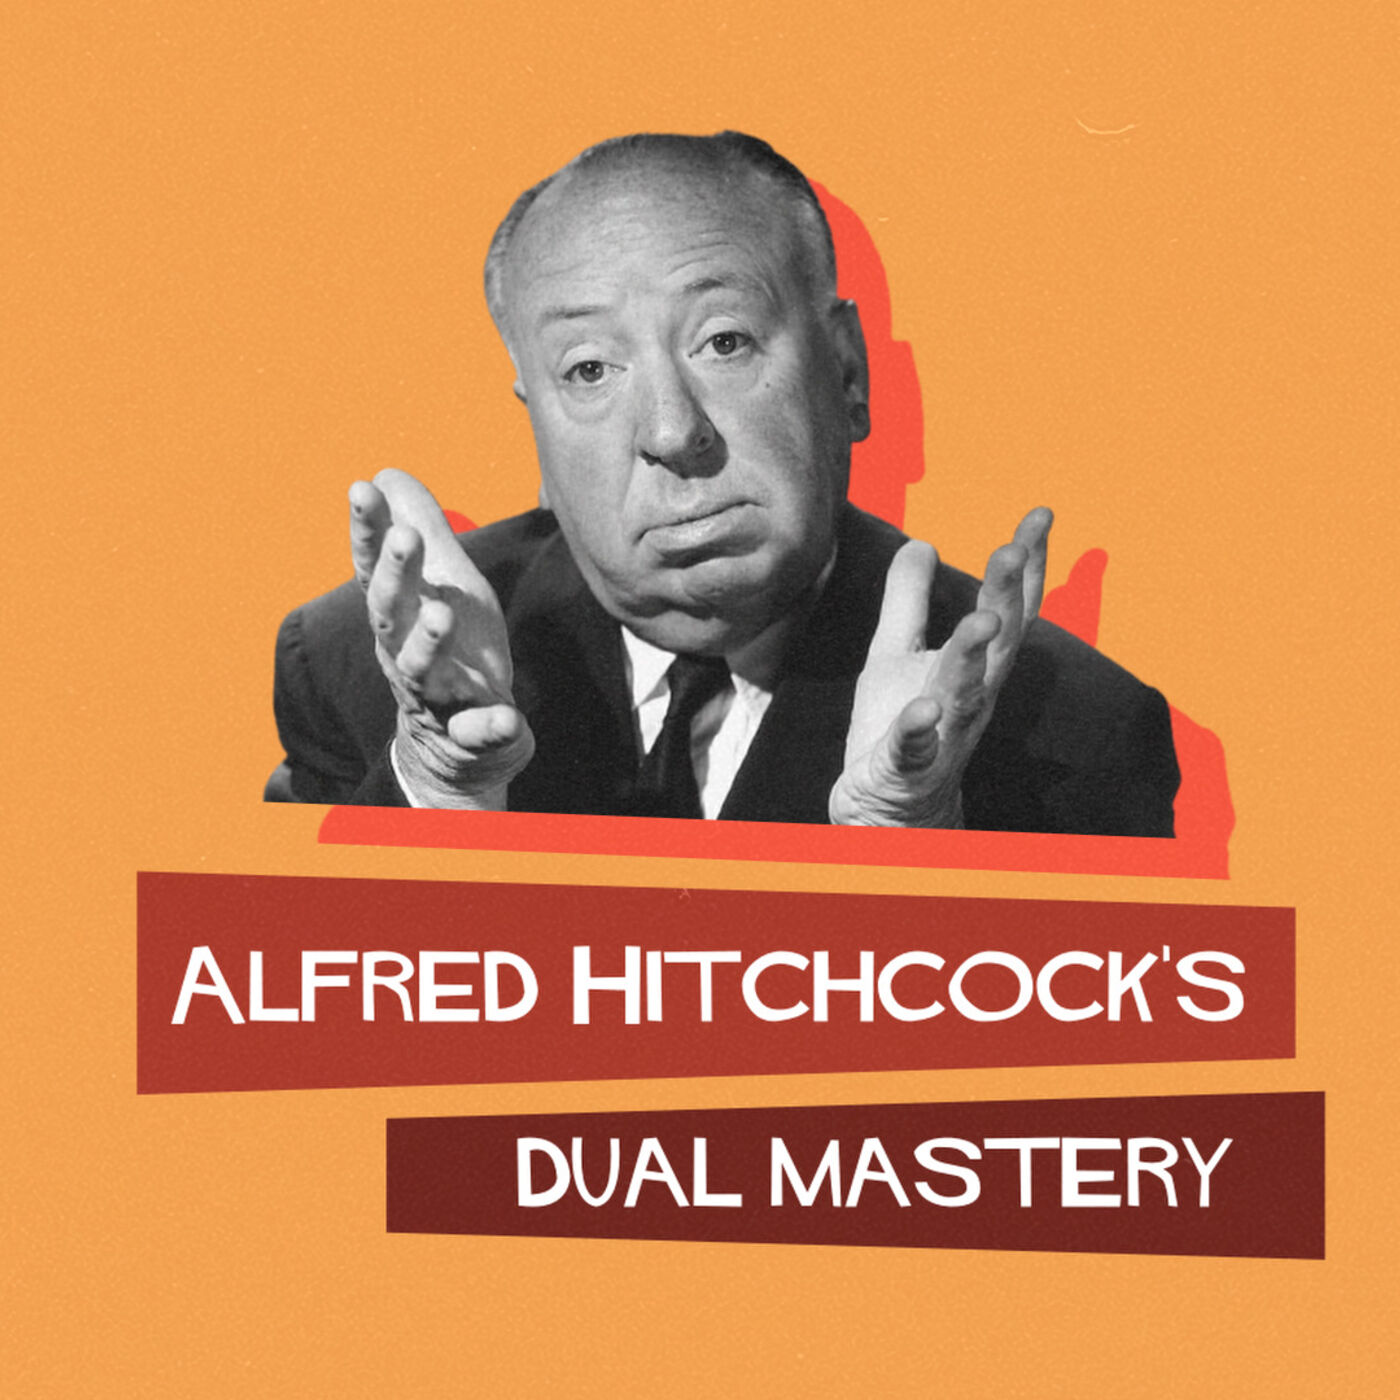 Alfred Hitchcock's Dual Mastery | The Directors Project